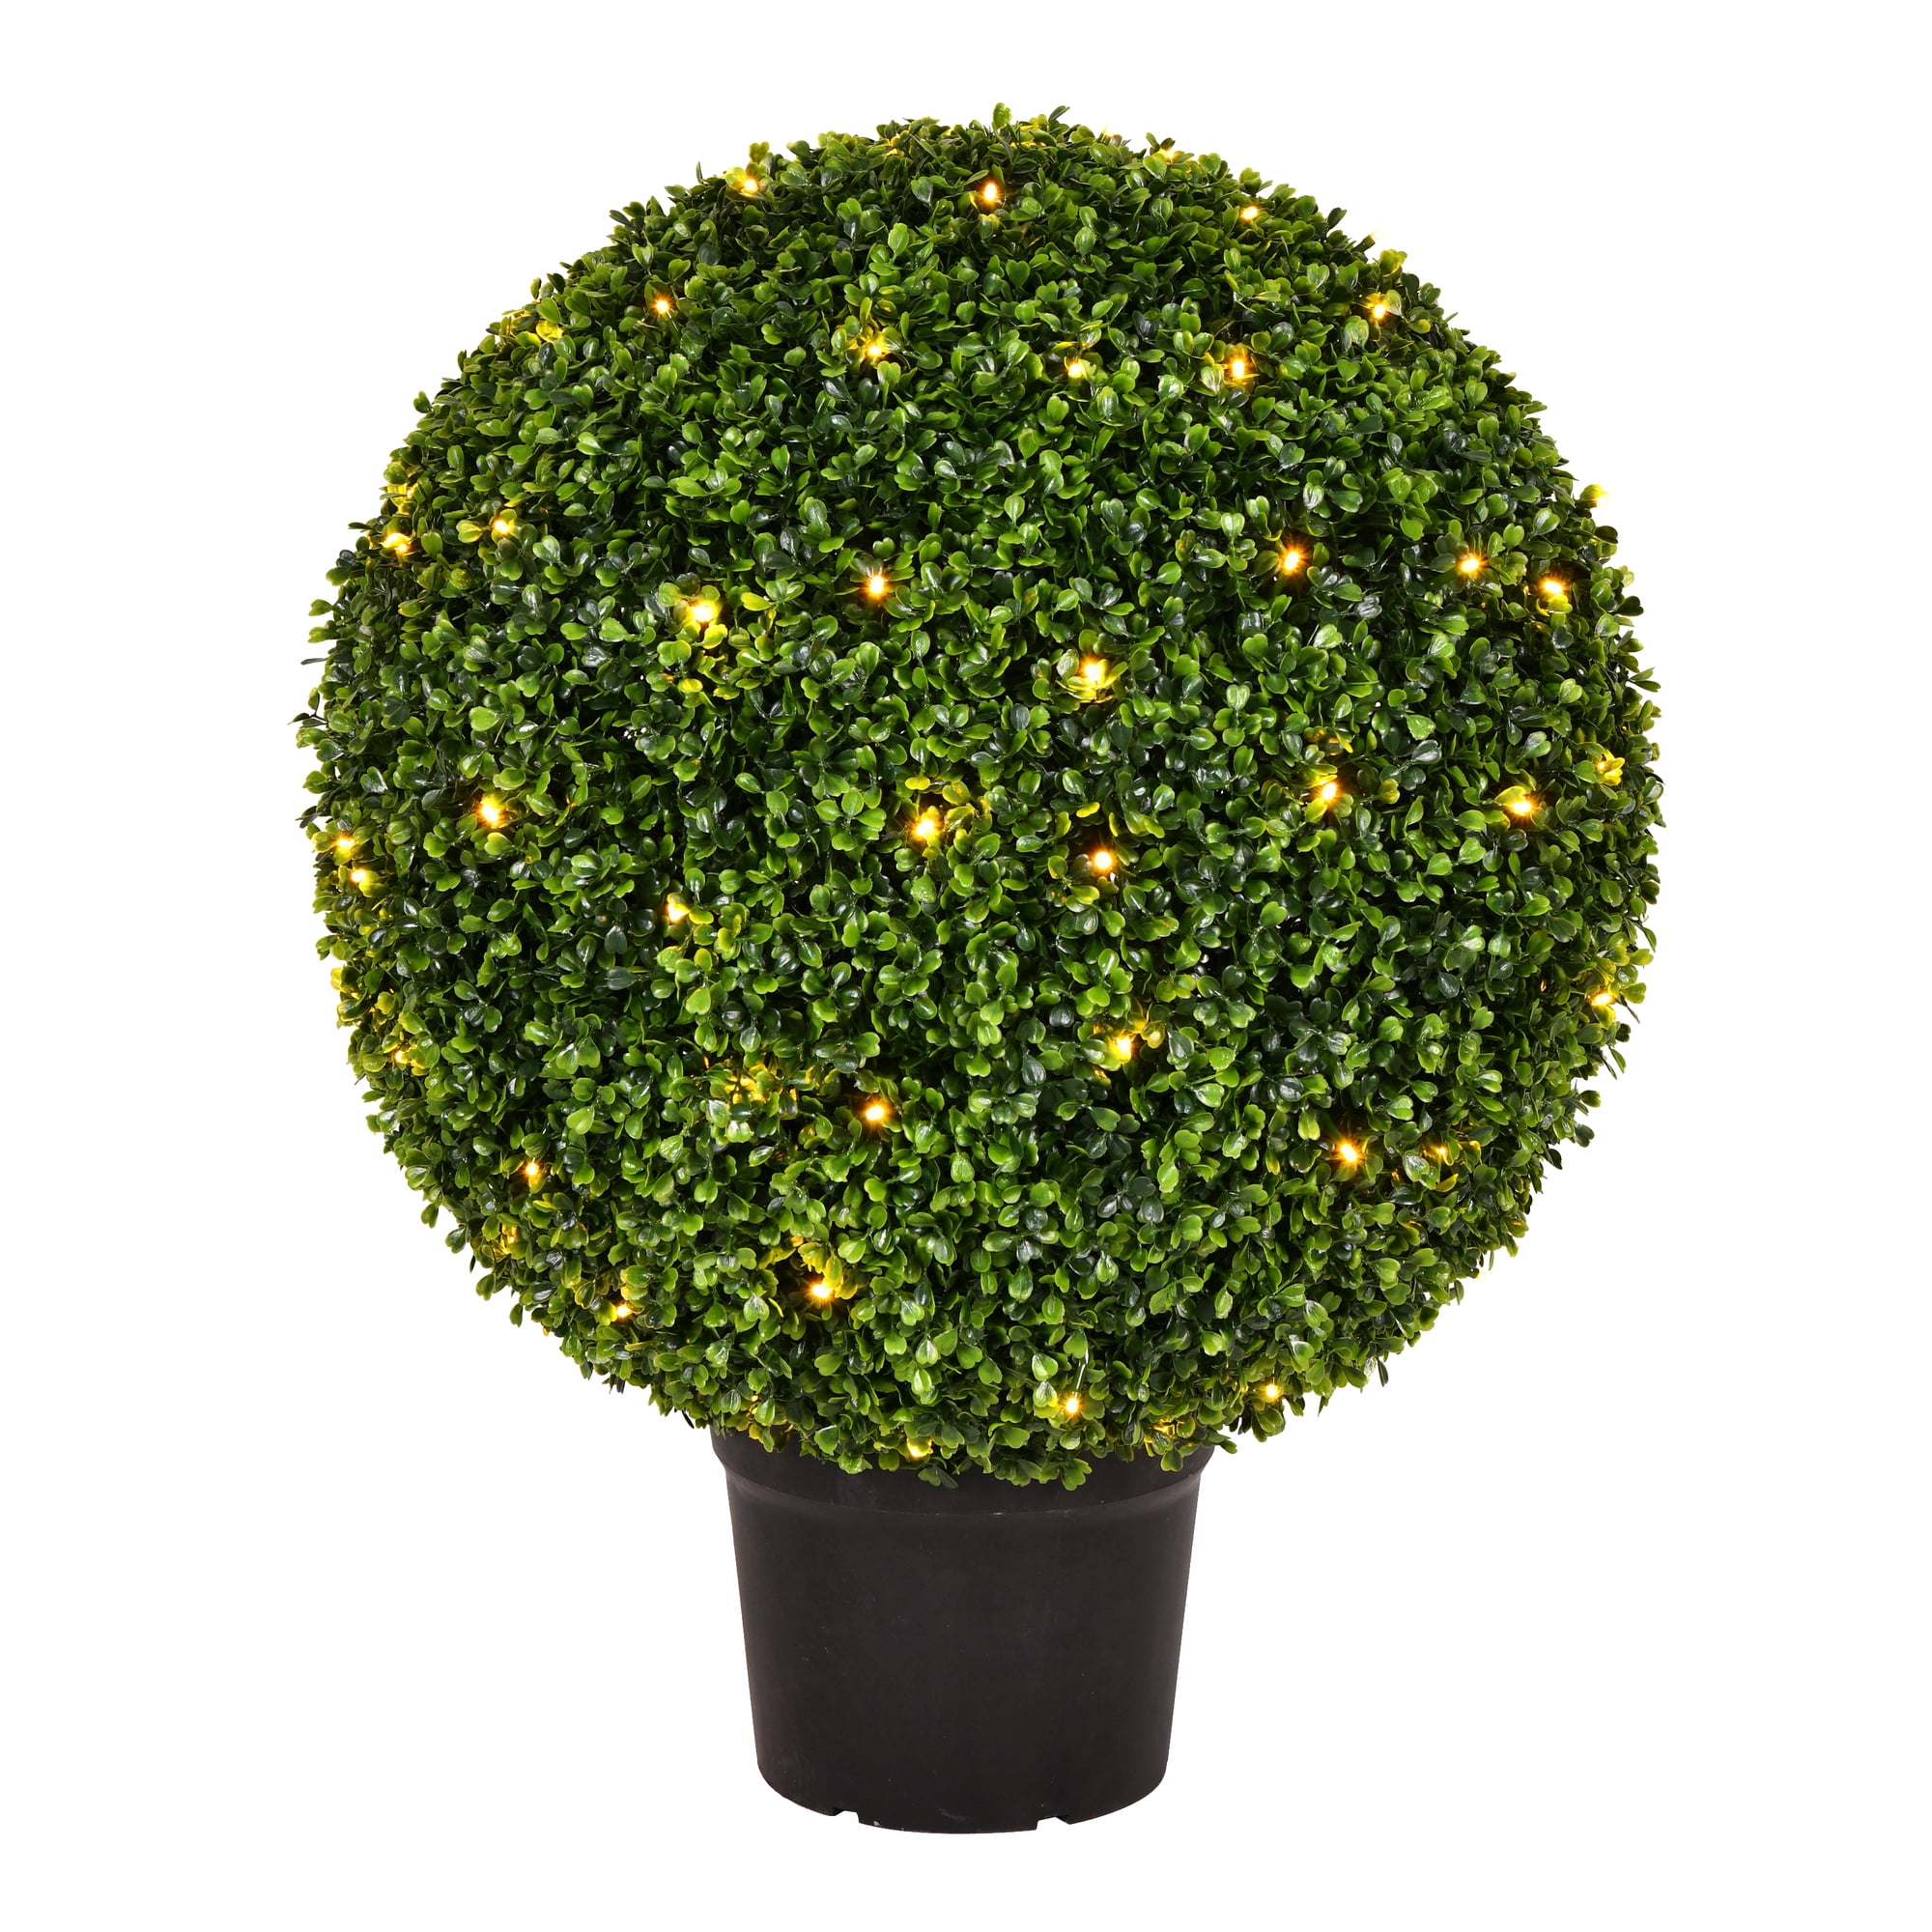 TP171324 Case of 1 Details about   Vickerman 24" Boxwood Ball In Pot UV 